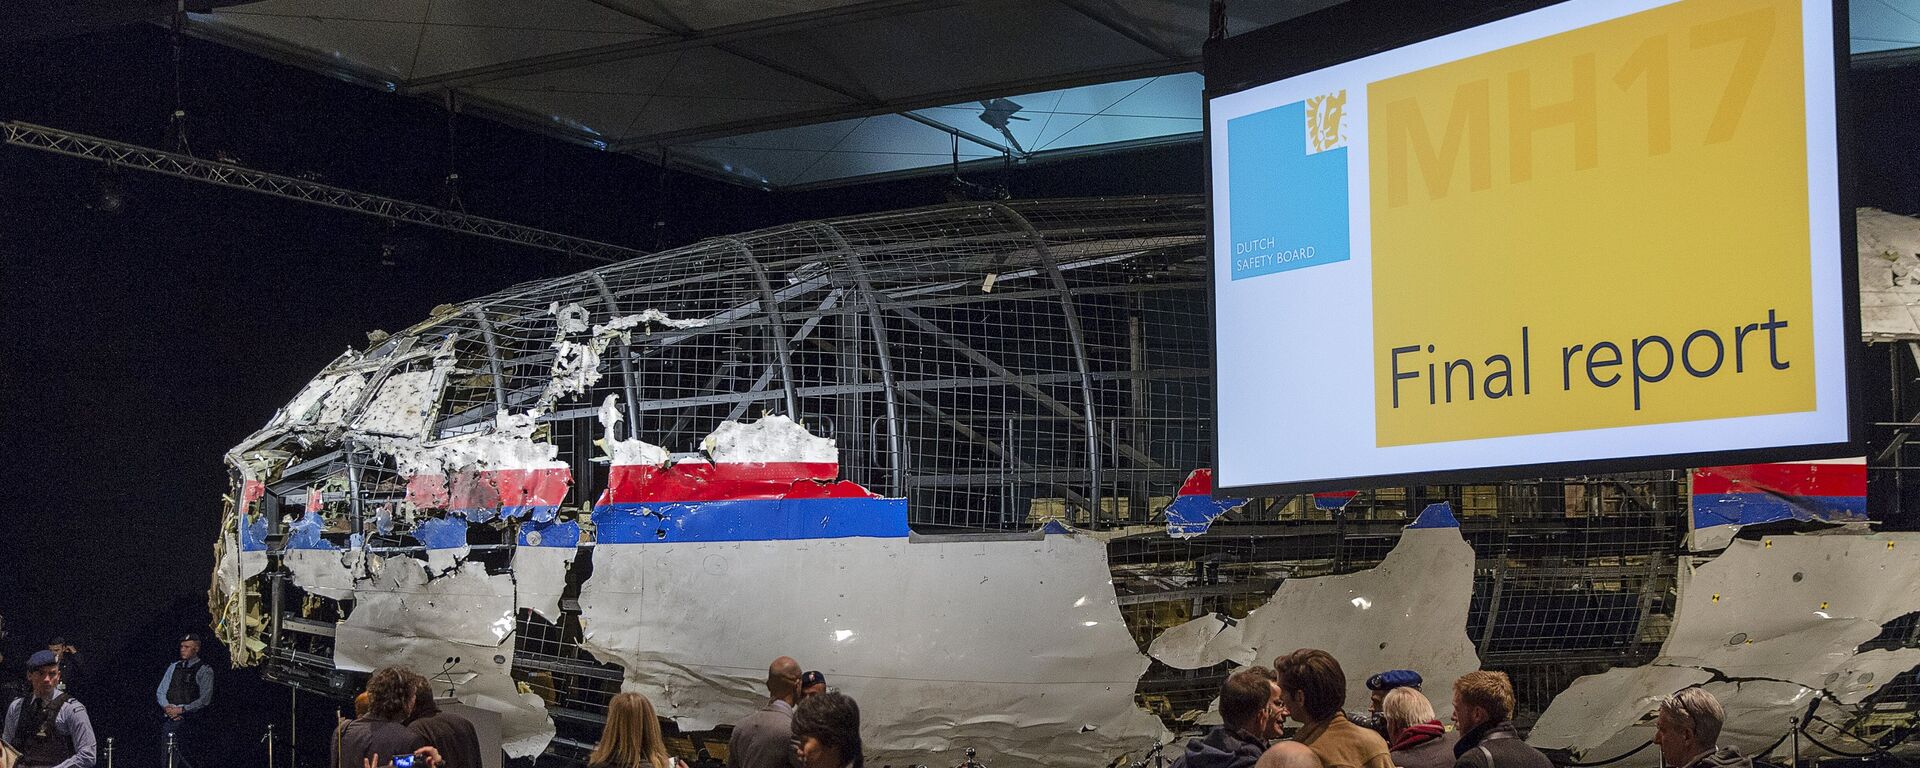 The reconstructed airplane serves as a backdrop during the presentation of the final report into the crash of July 2014 of Malaysia Airlines flight MH17 over Ukraine, in Gilze Rijen, the Netherlands, October 13, 2015 - Sputnik International, 1920, 21.12.2021